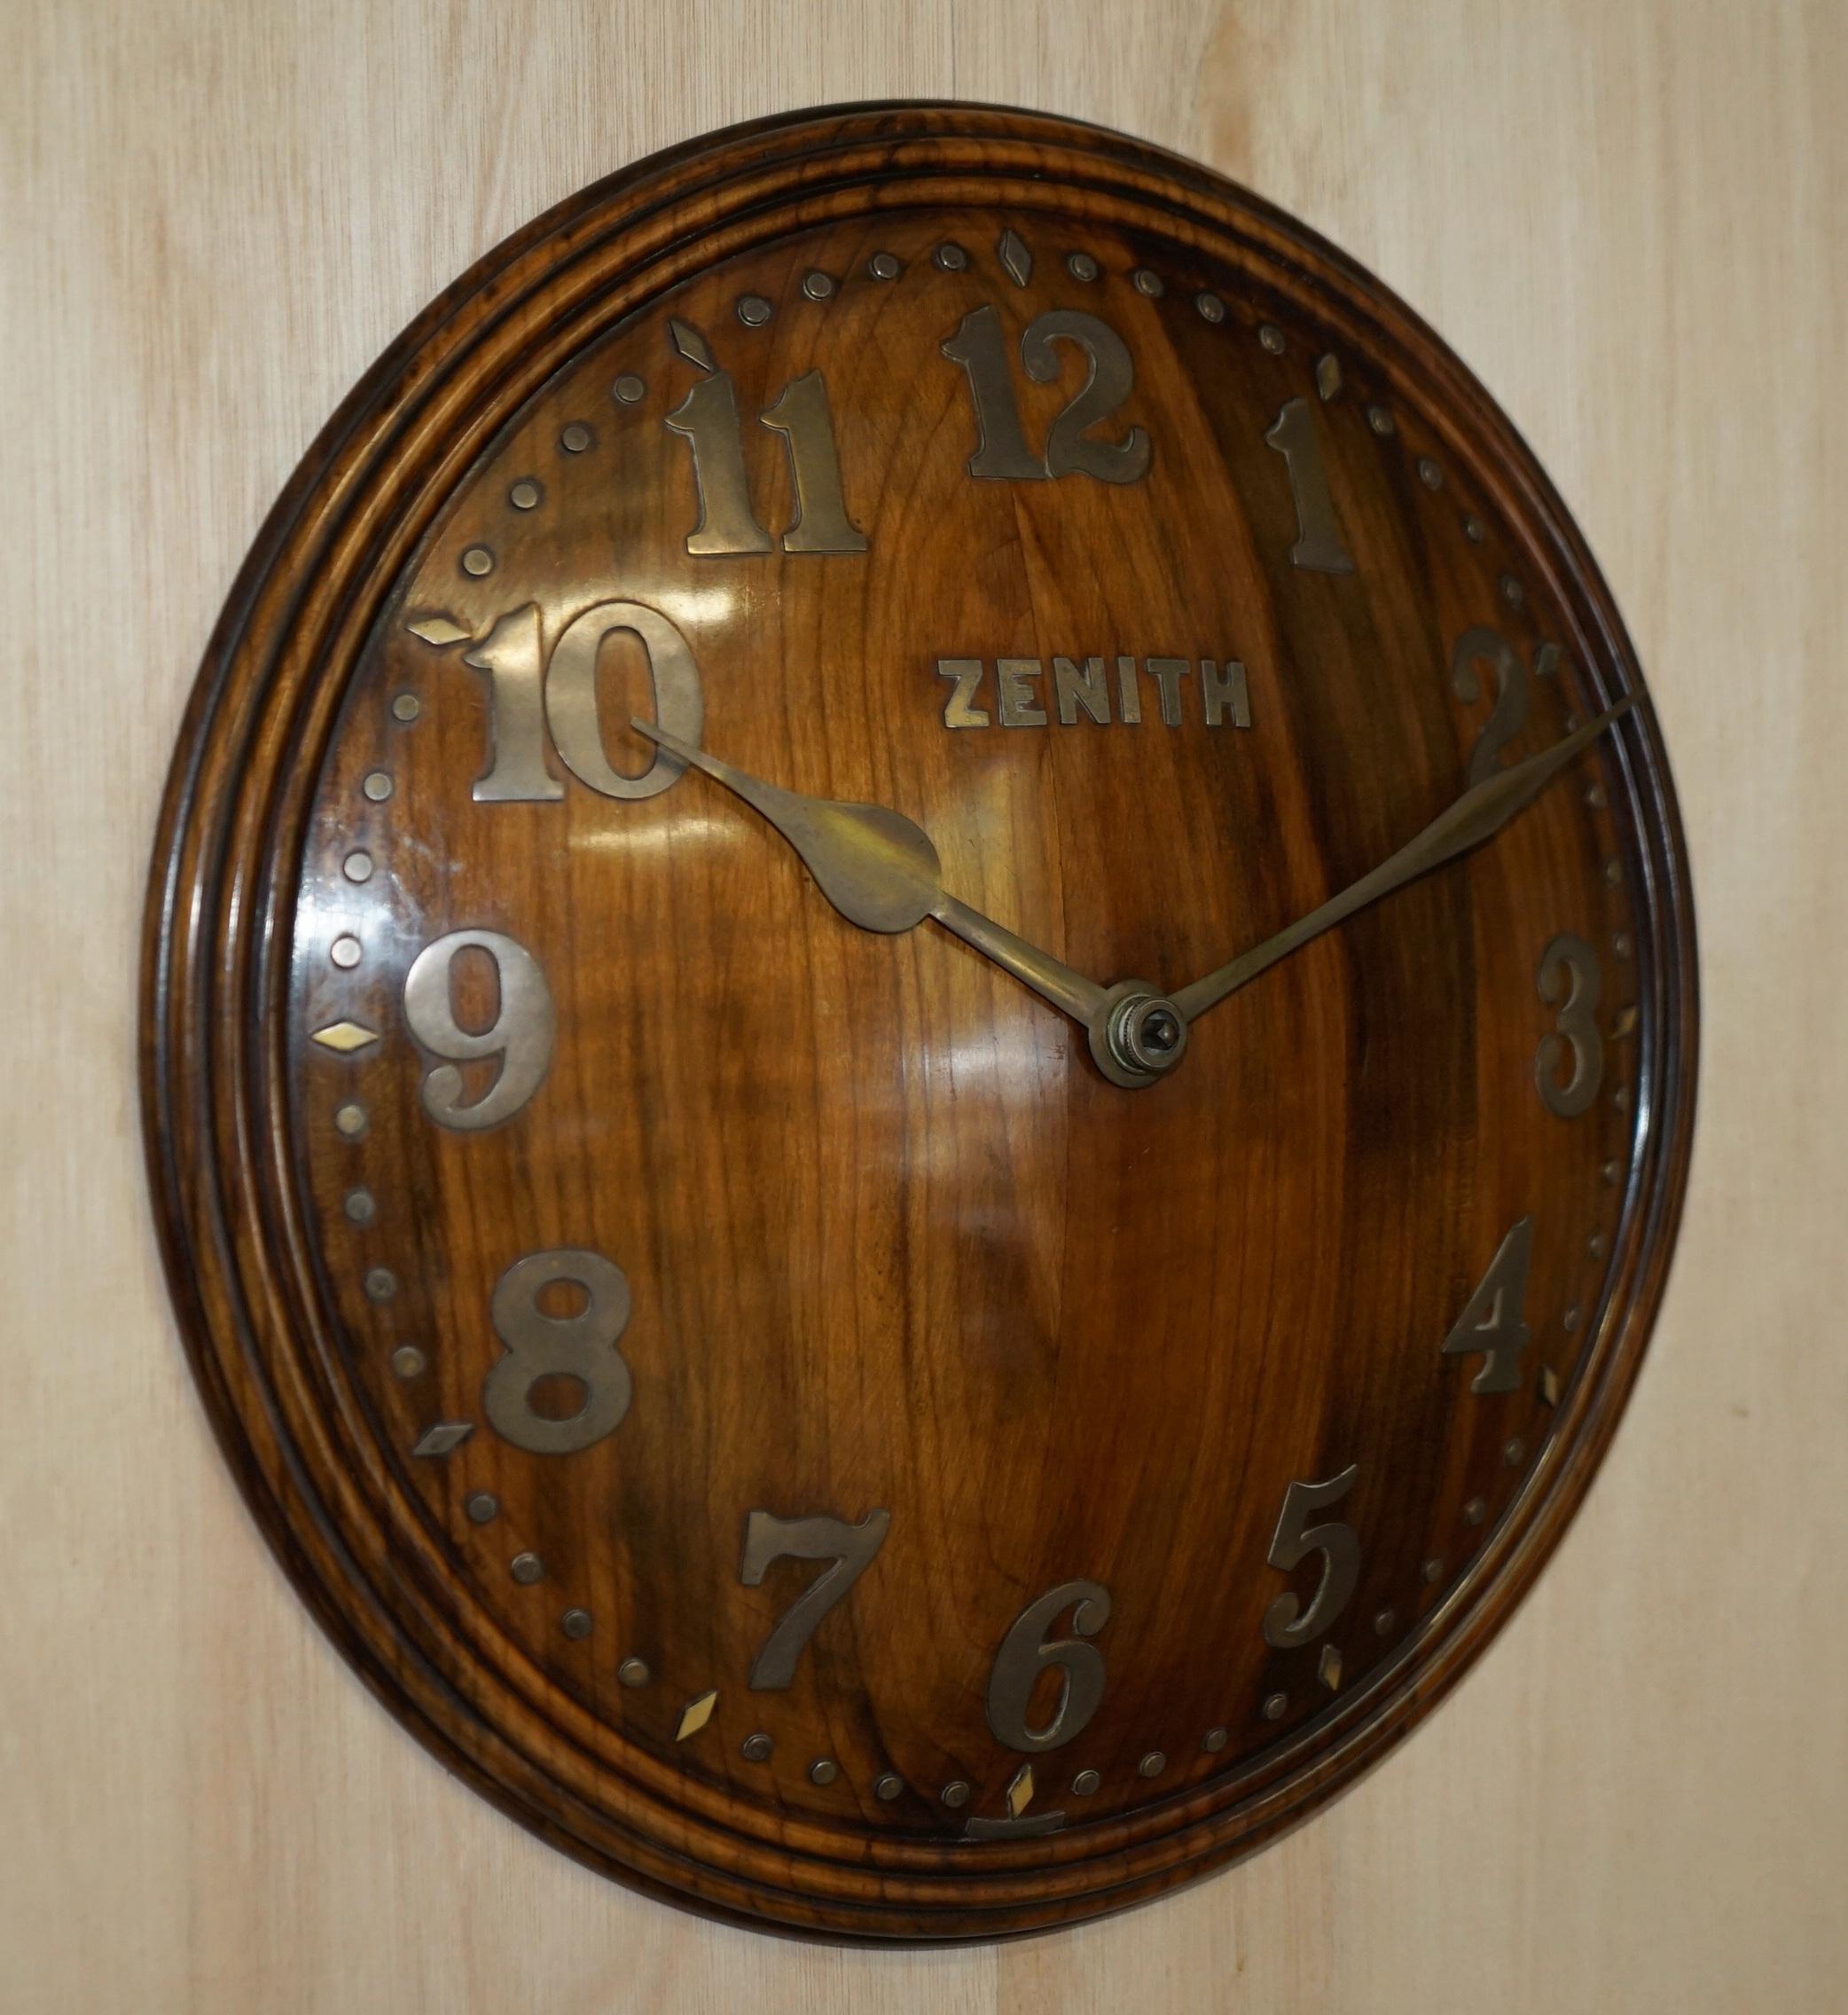 We are delighted to offer for sale this absolutely sublime circa 1920, restored Zenith convex wall clock.

I bought this piece for myself, had it restored by my French polisher but never found a space for it, as such it has sat unused for the last